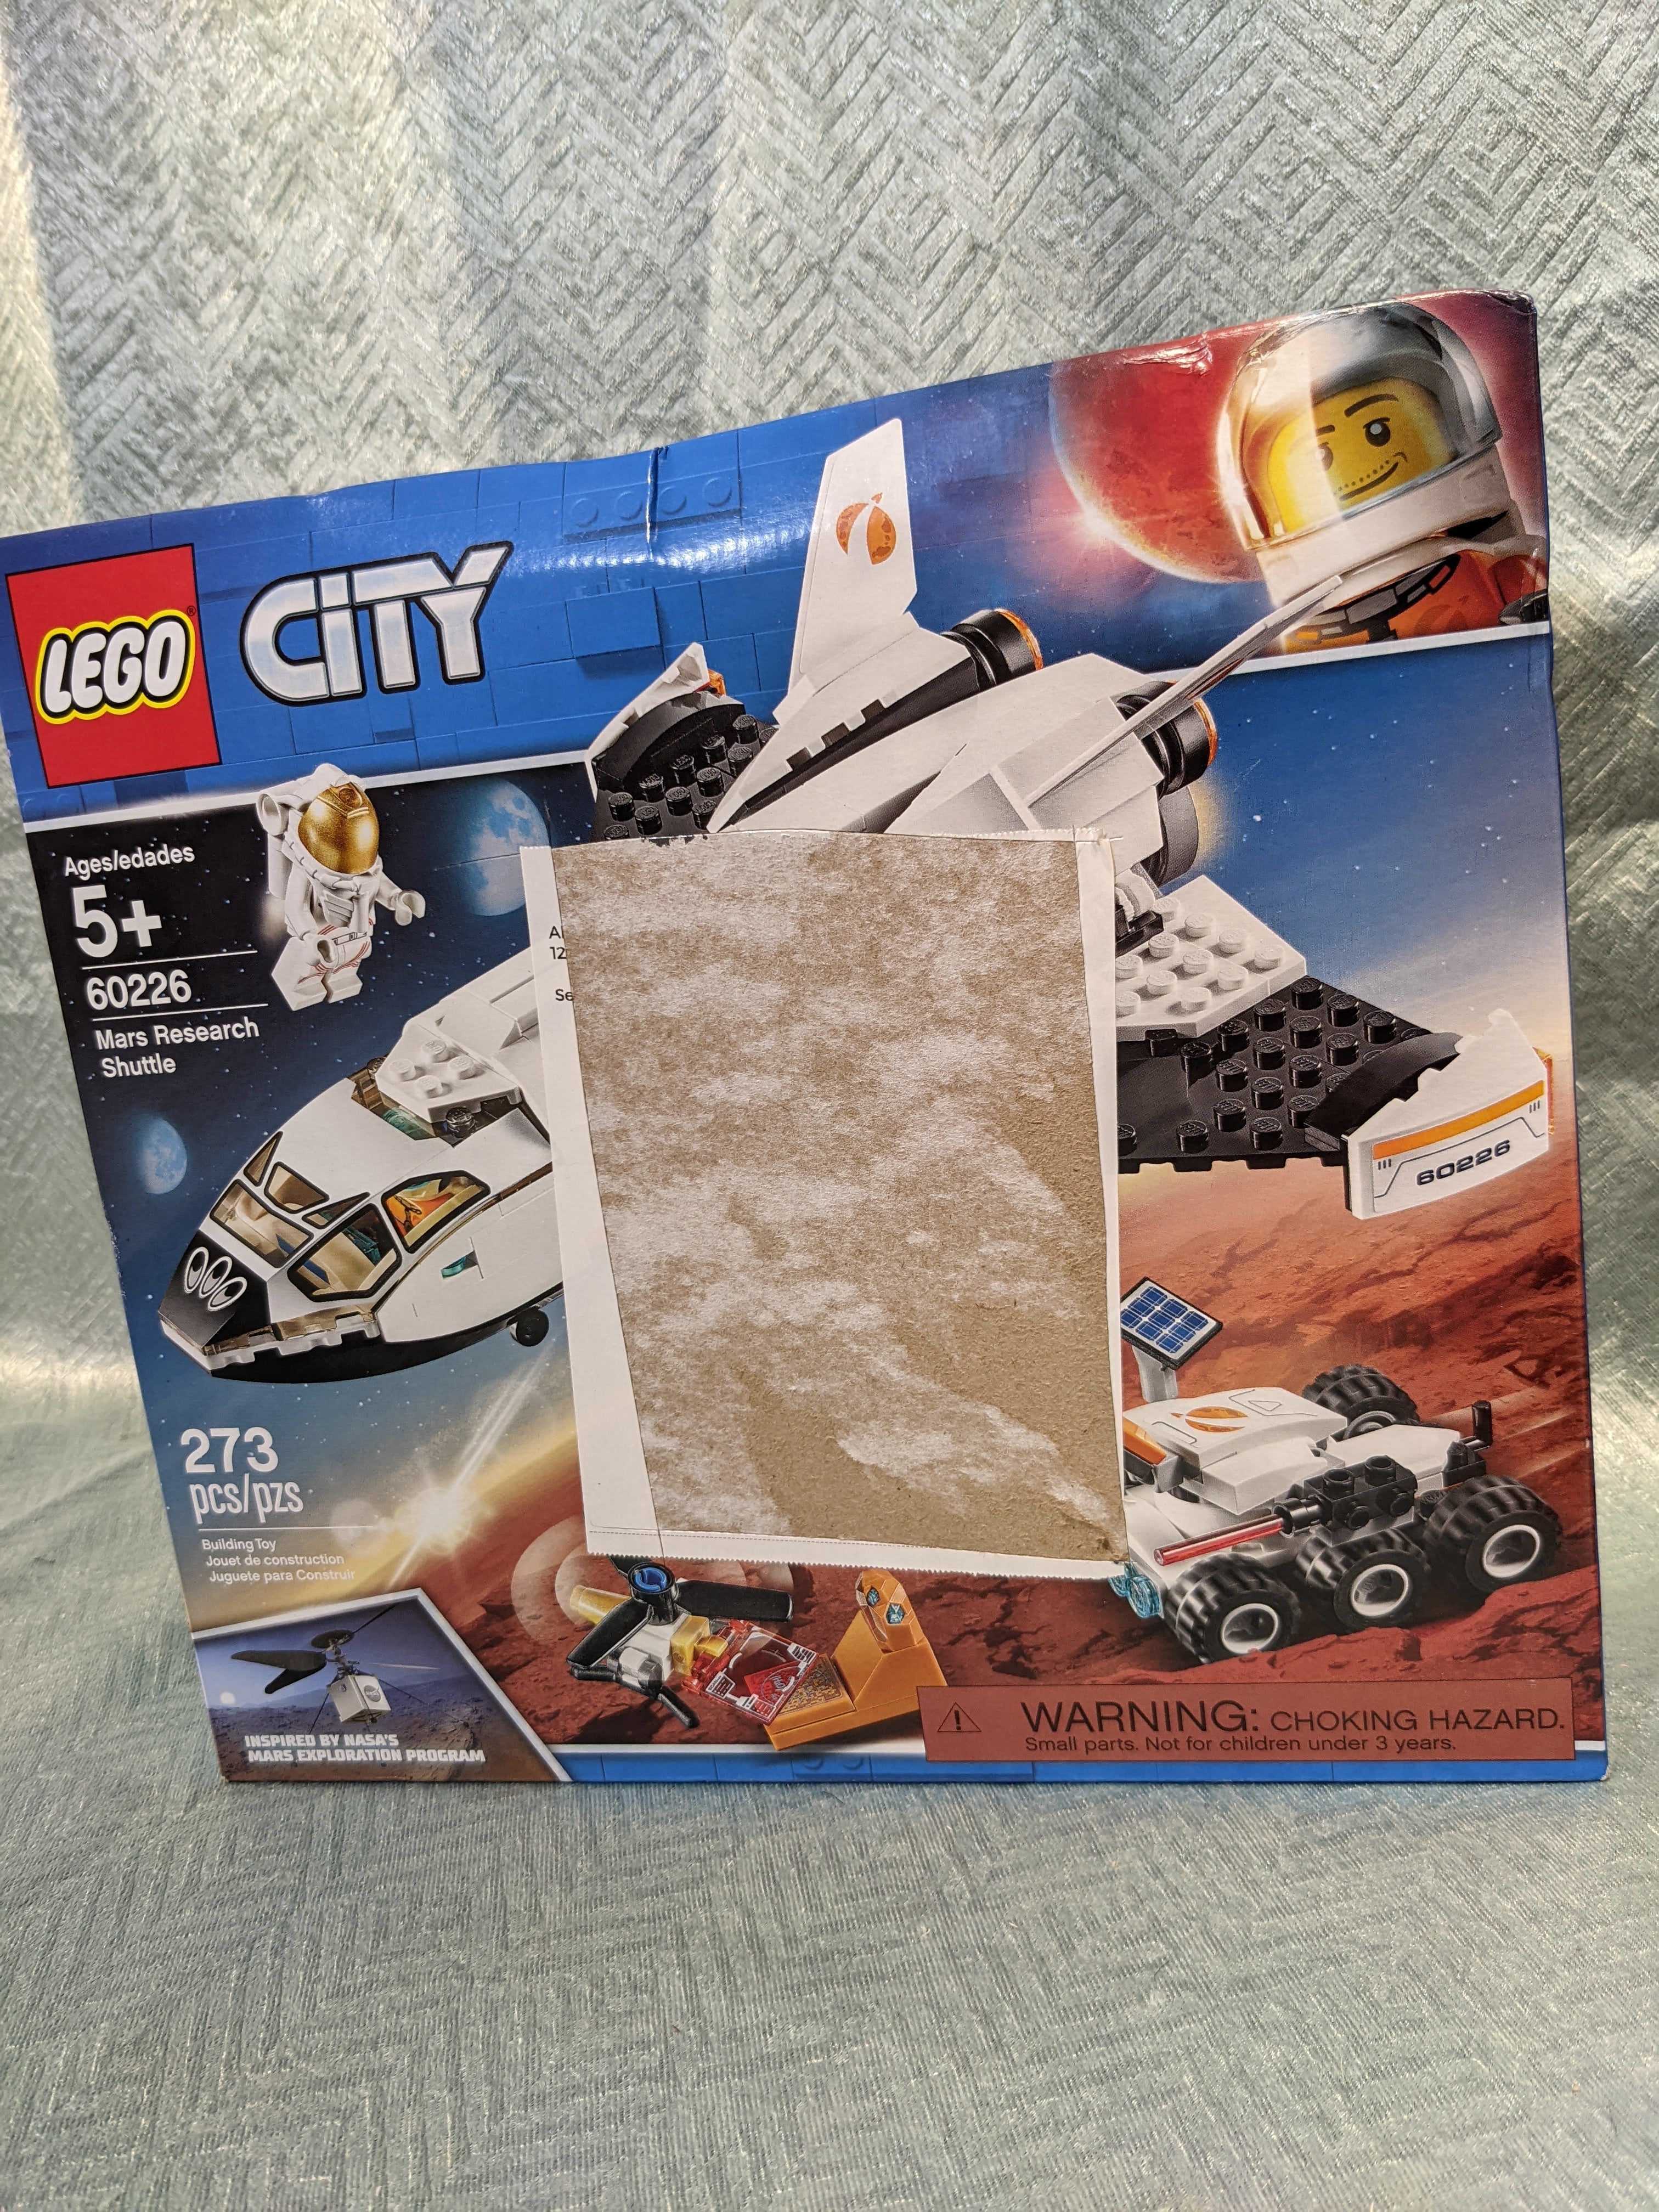 LEGO City Space Mars Research Shuttle 60226 Space Shuttle Toy Building Kit with Mars Rover and Astronaut Minifigures, Top STEM Toy for Boys and Girls (273 Pieces) (7591679688942)